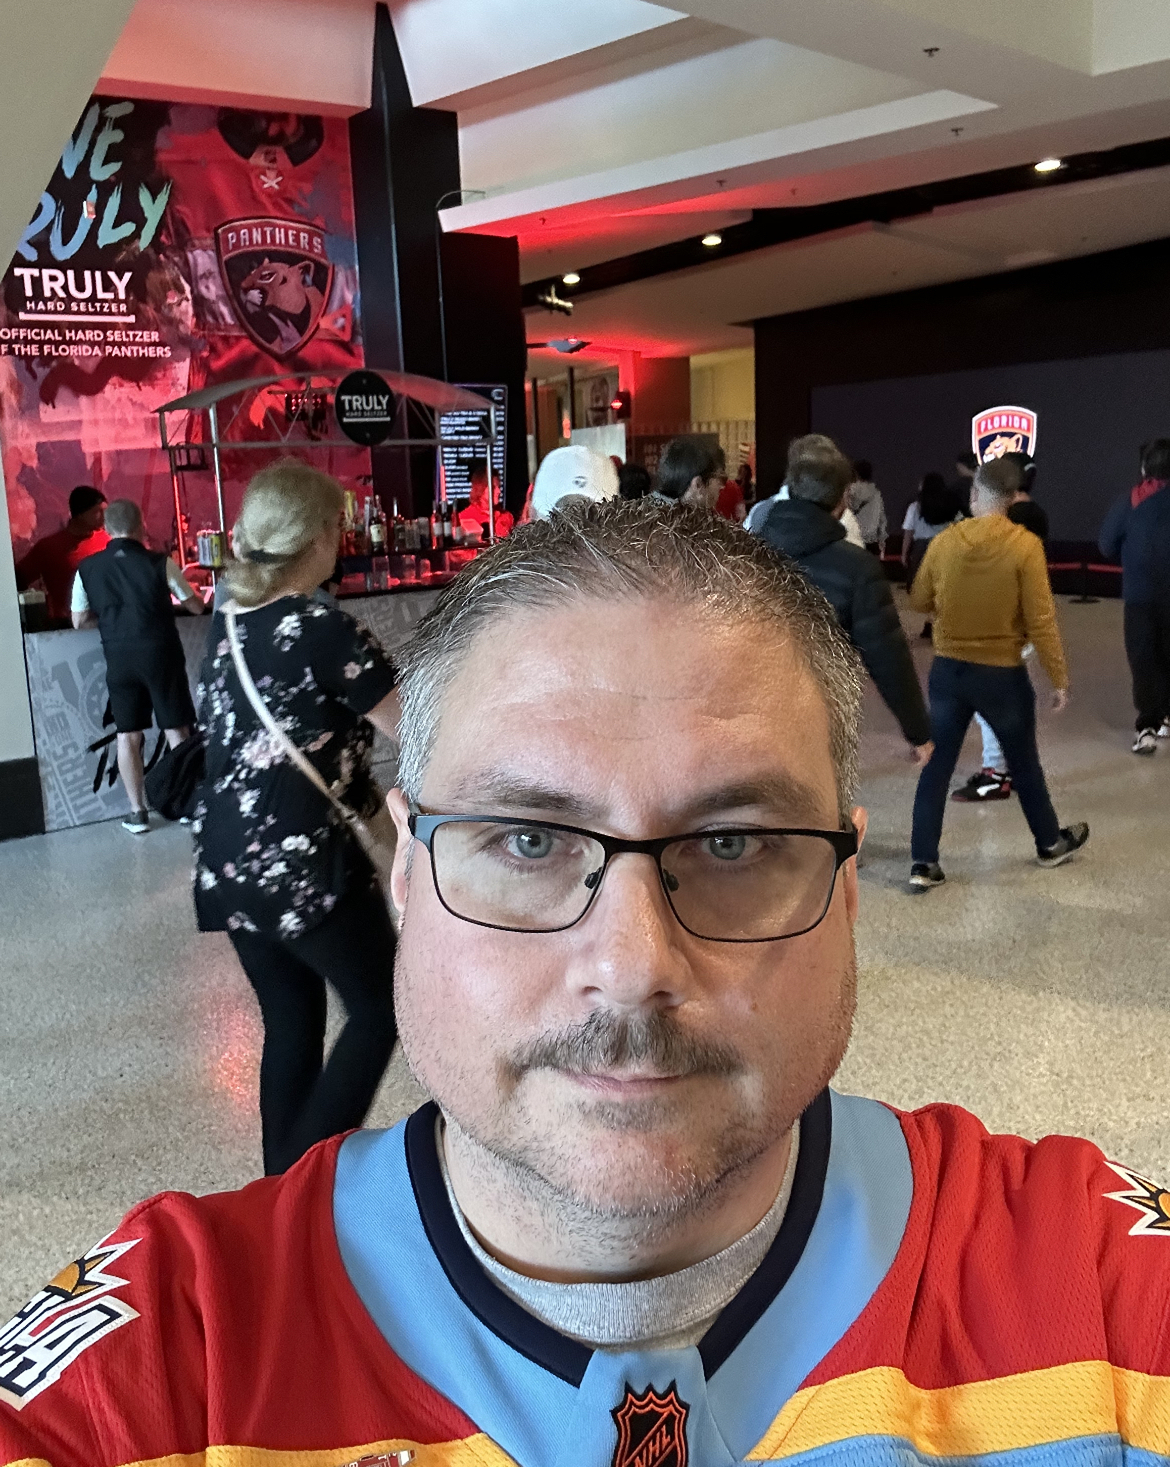 Florida Panthers - NHL vs Montreal Canadiens